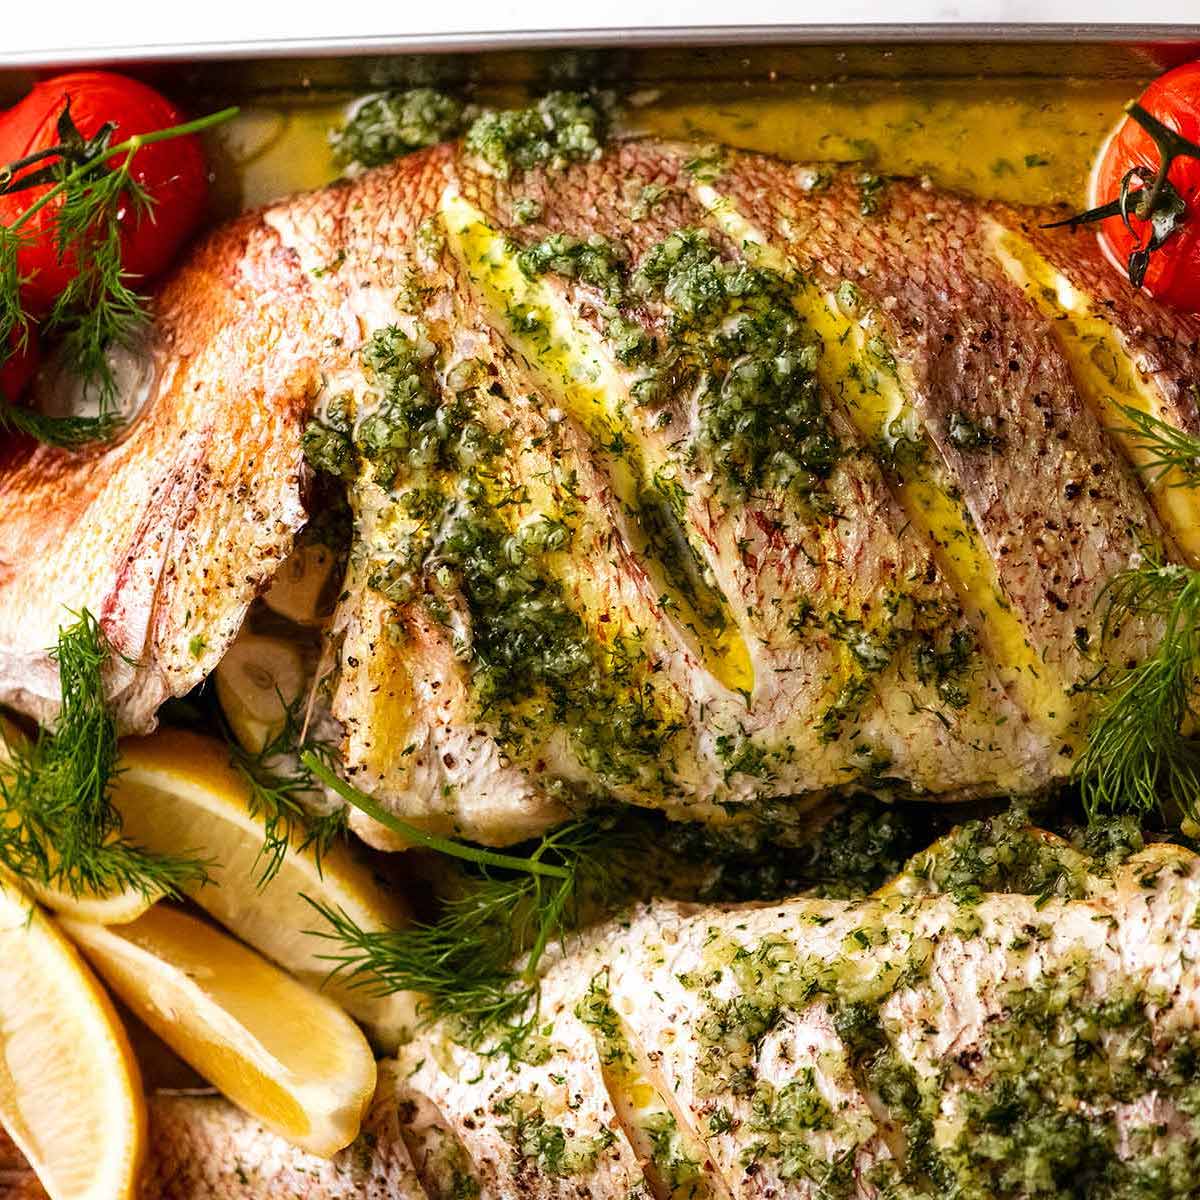 gourmet traveller whole baked fish